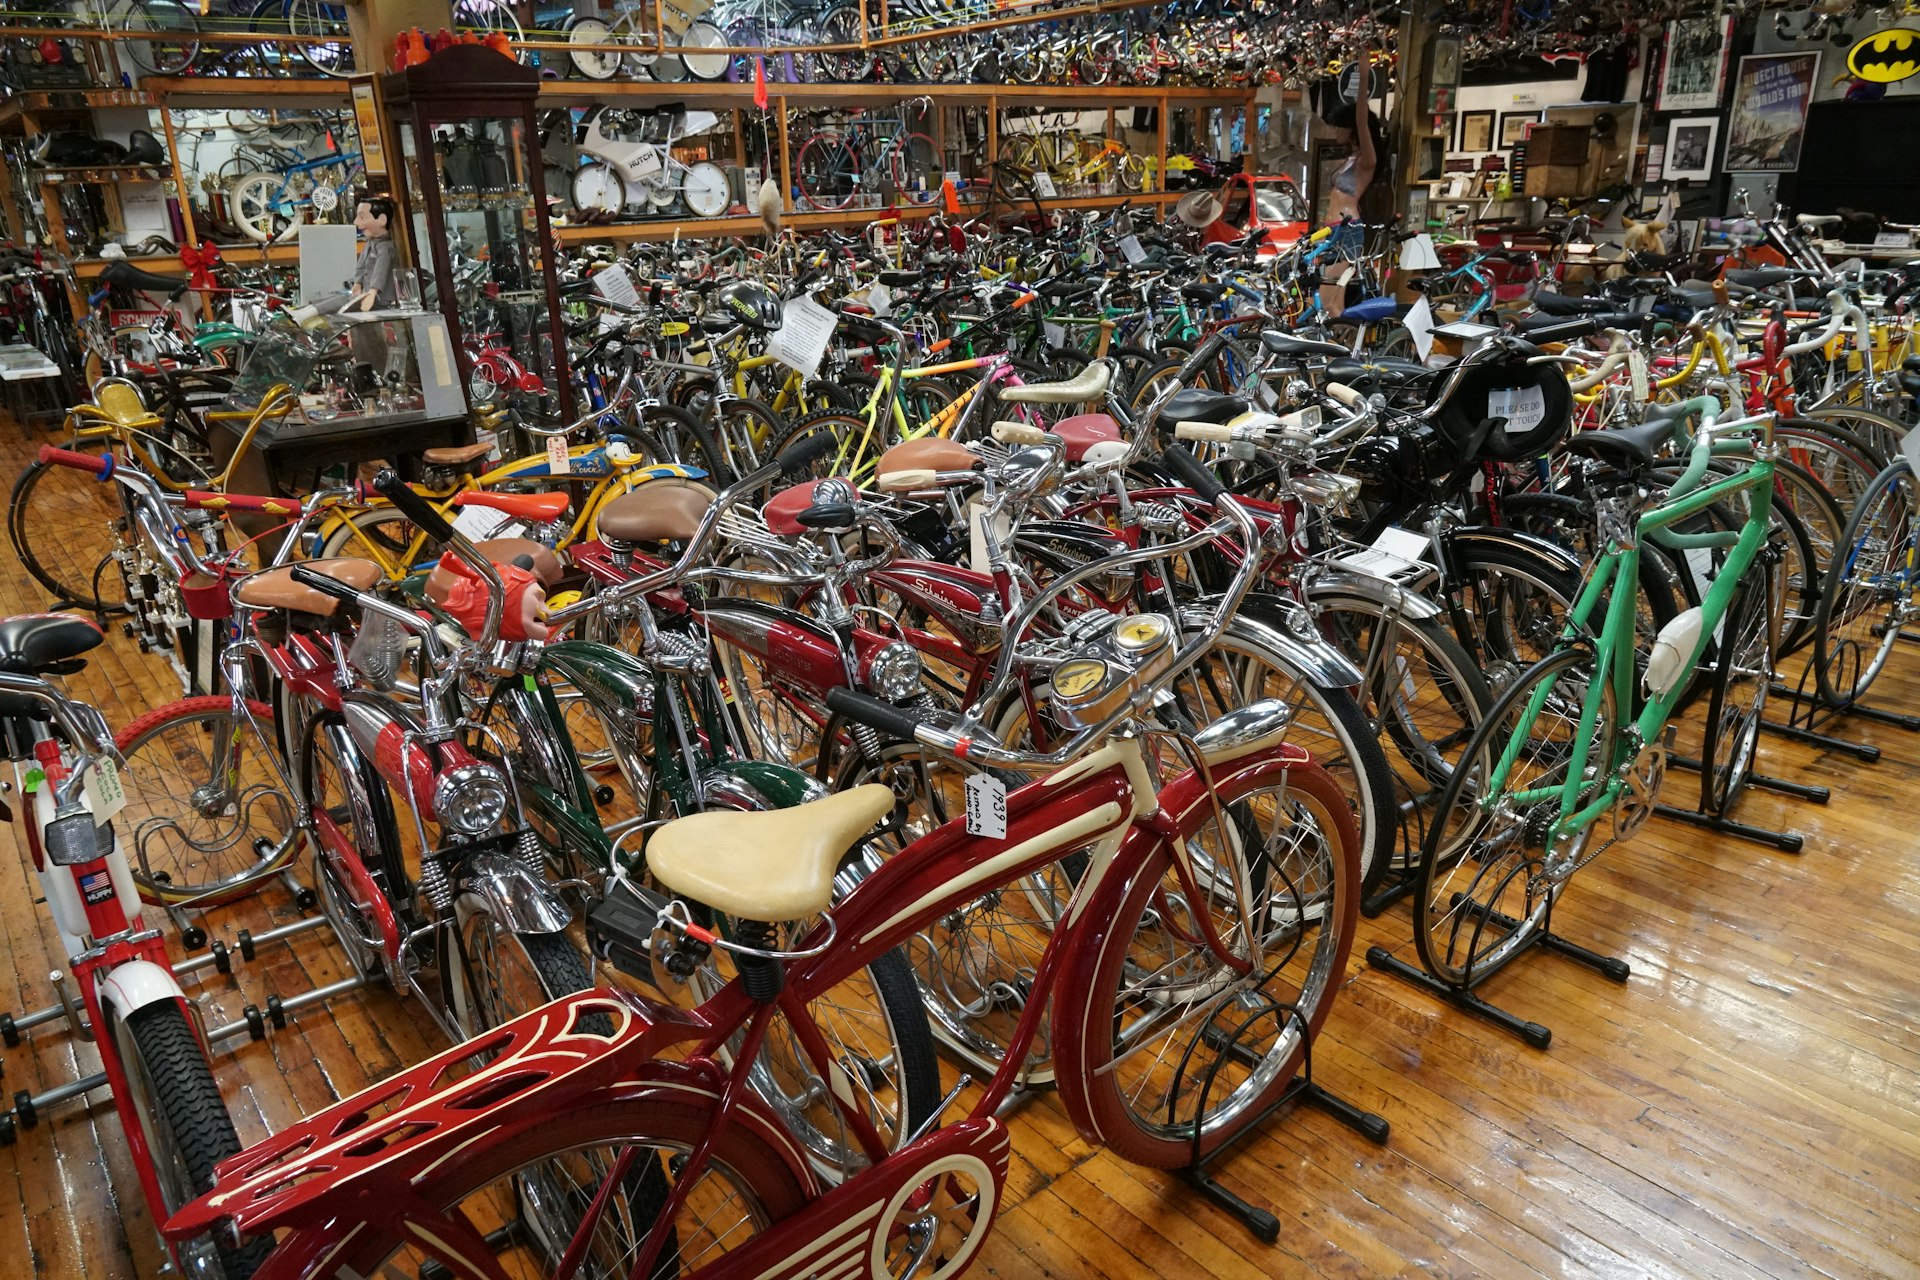 A room with glossy old hardwood floors is crammed with an inconceivable number of bicycles in all colors, shapes and sizes. In the foreground is a red bicycle with a cream seat and a teal one with a narrow, modern frame, but all you can see of the others are a jumble of seats, handlebars, and chrome gleam